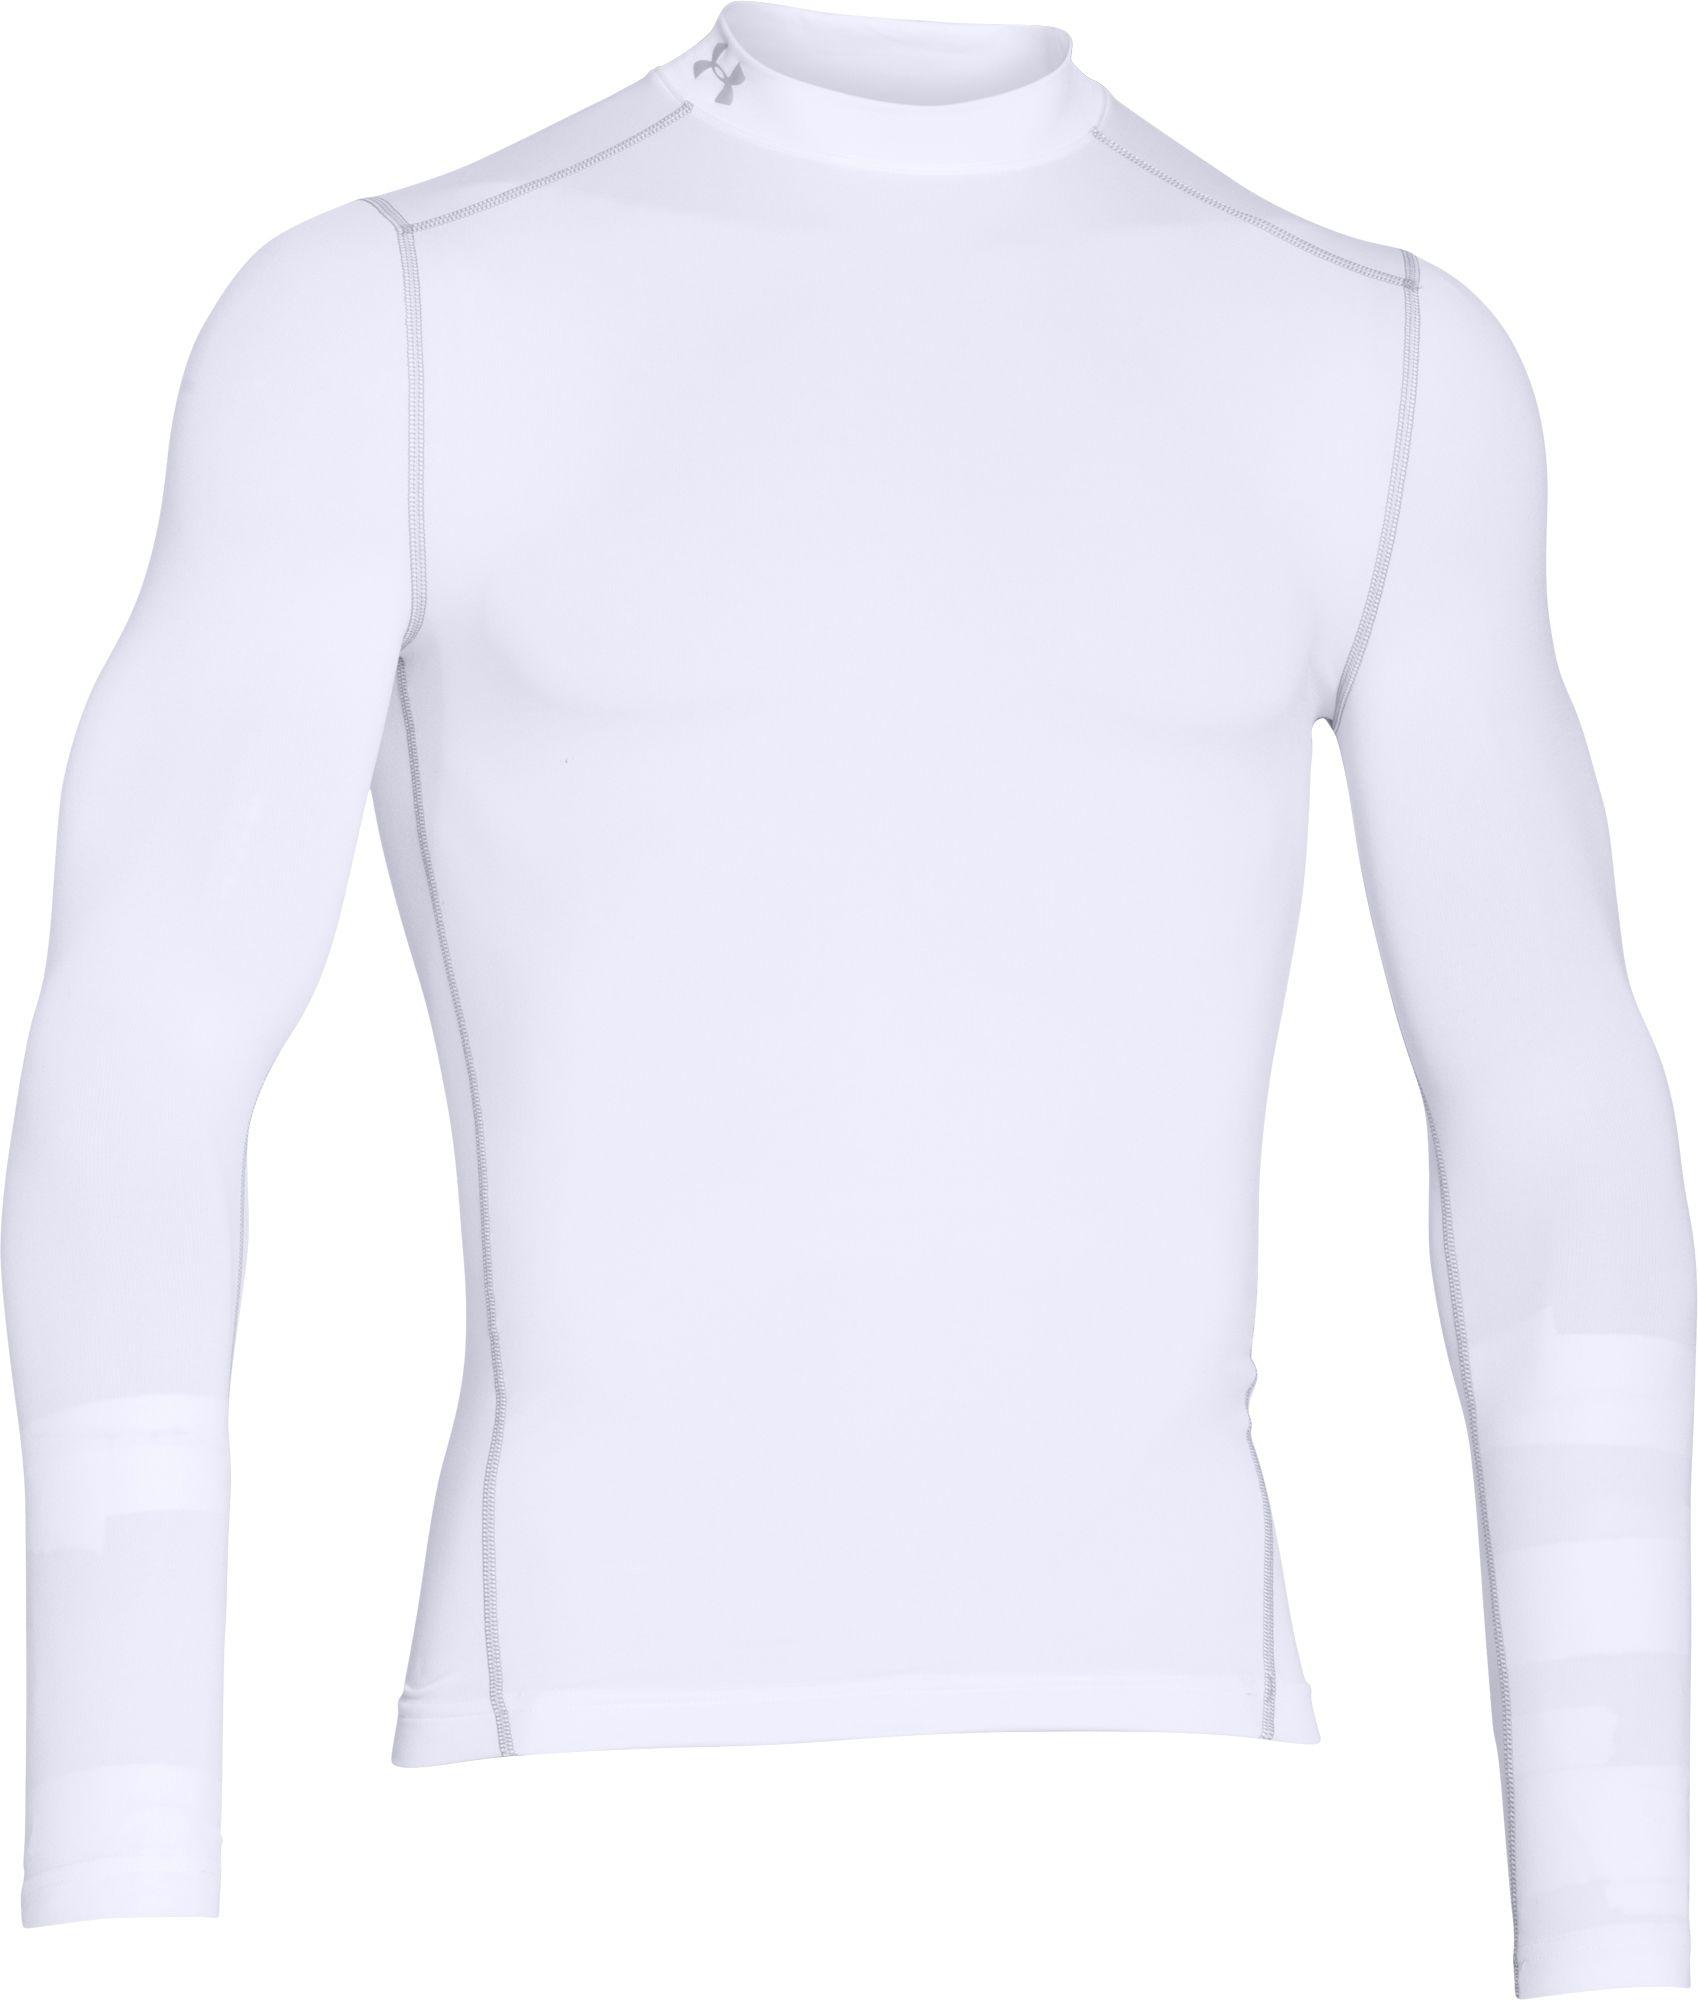 Under Armour Synthetic Coldgear Armour Compression Mock Neck Long ...